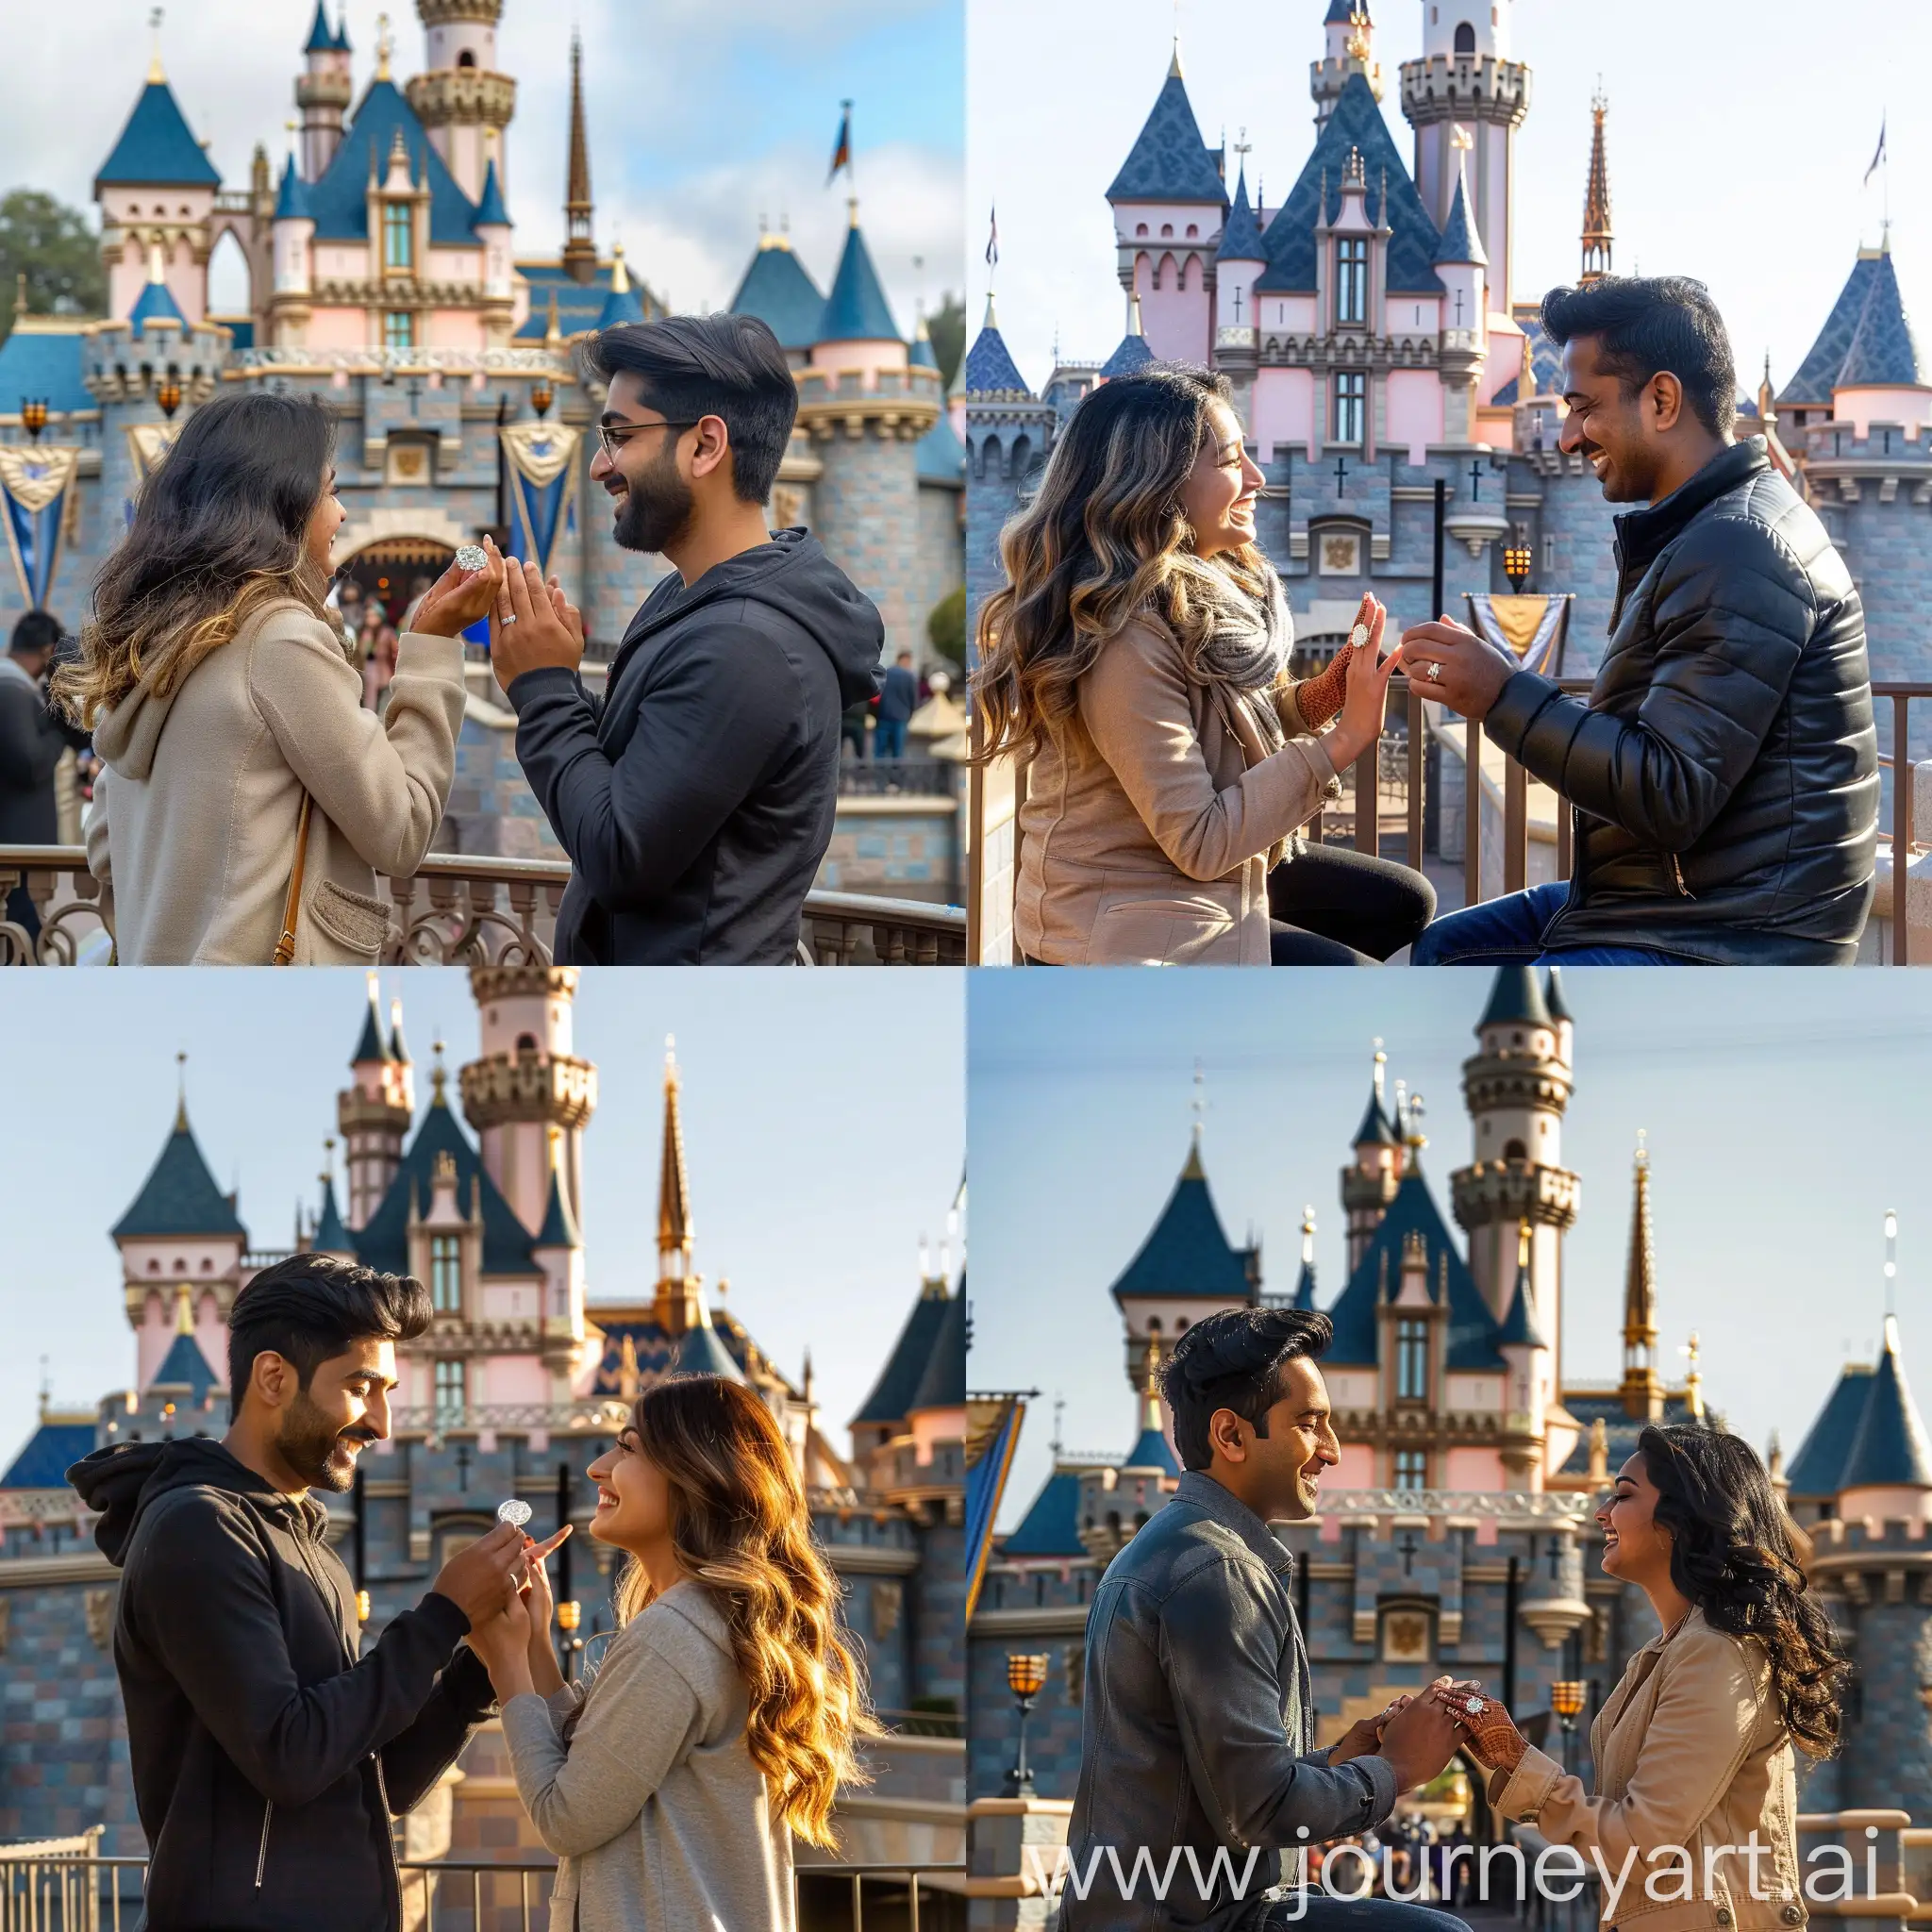 A handsome Indian man proposing to his indian girlfriend with wavy hair in front the Disneyland iconic castle with a shiny diamond ring
